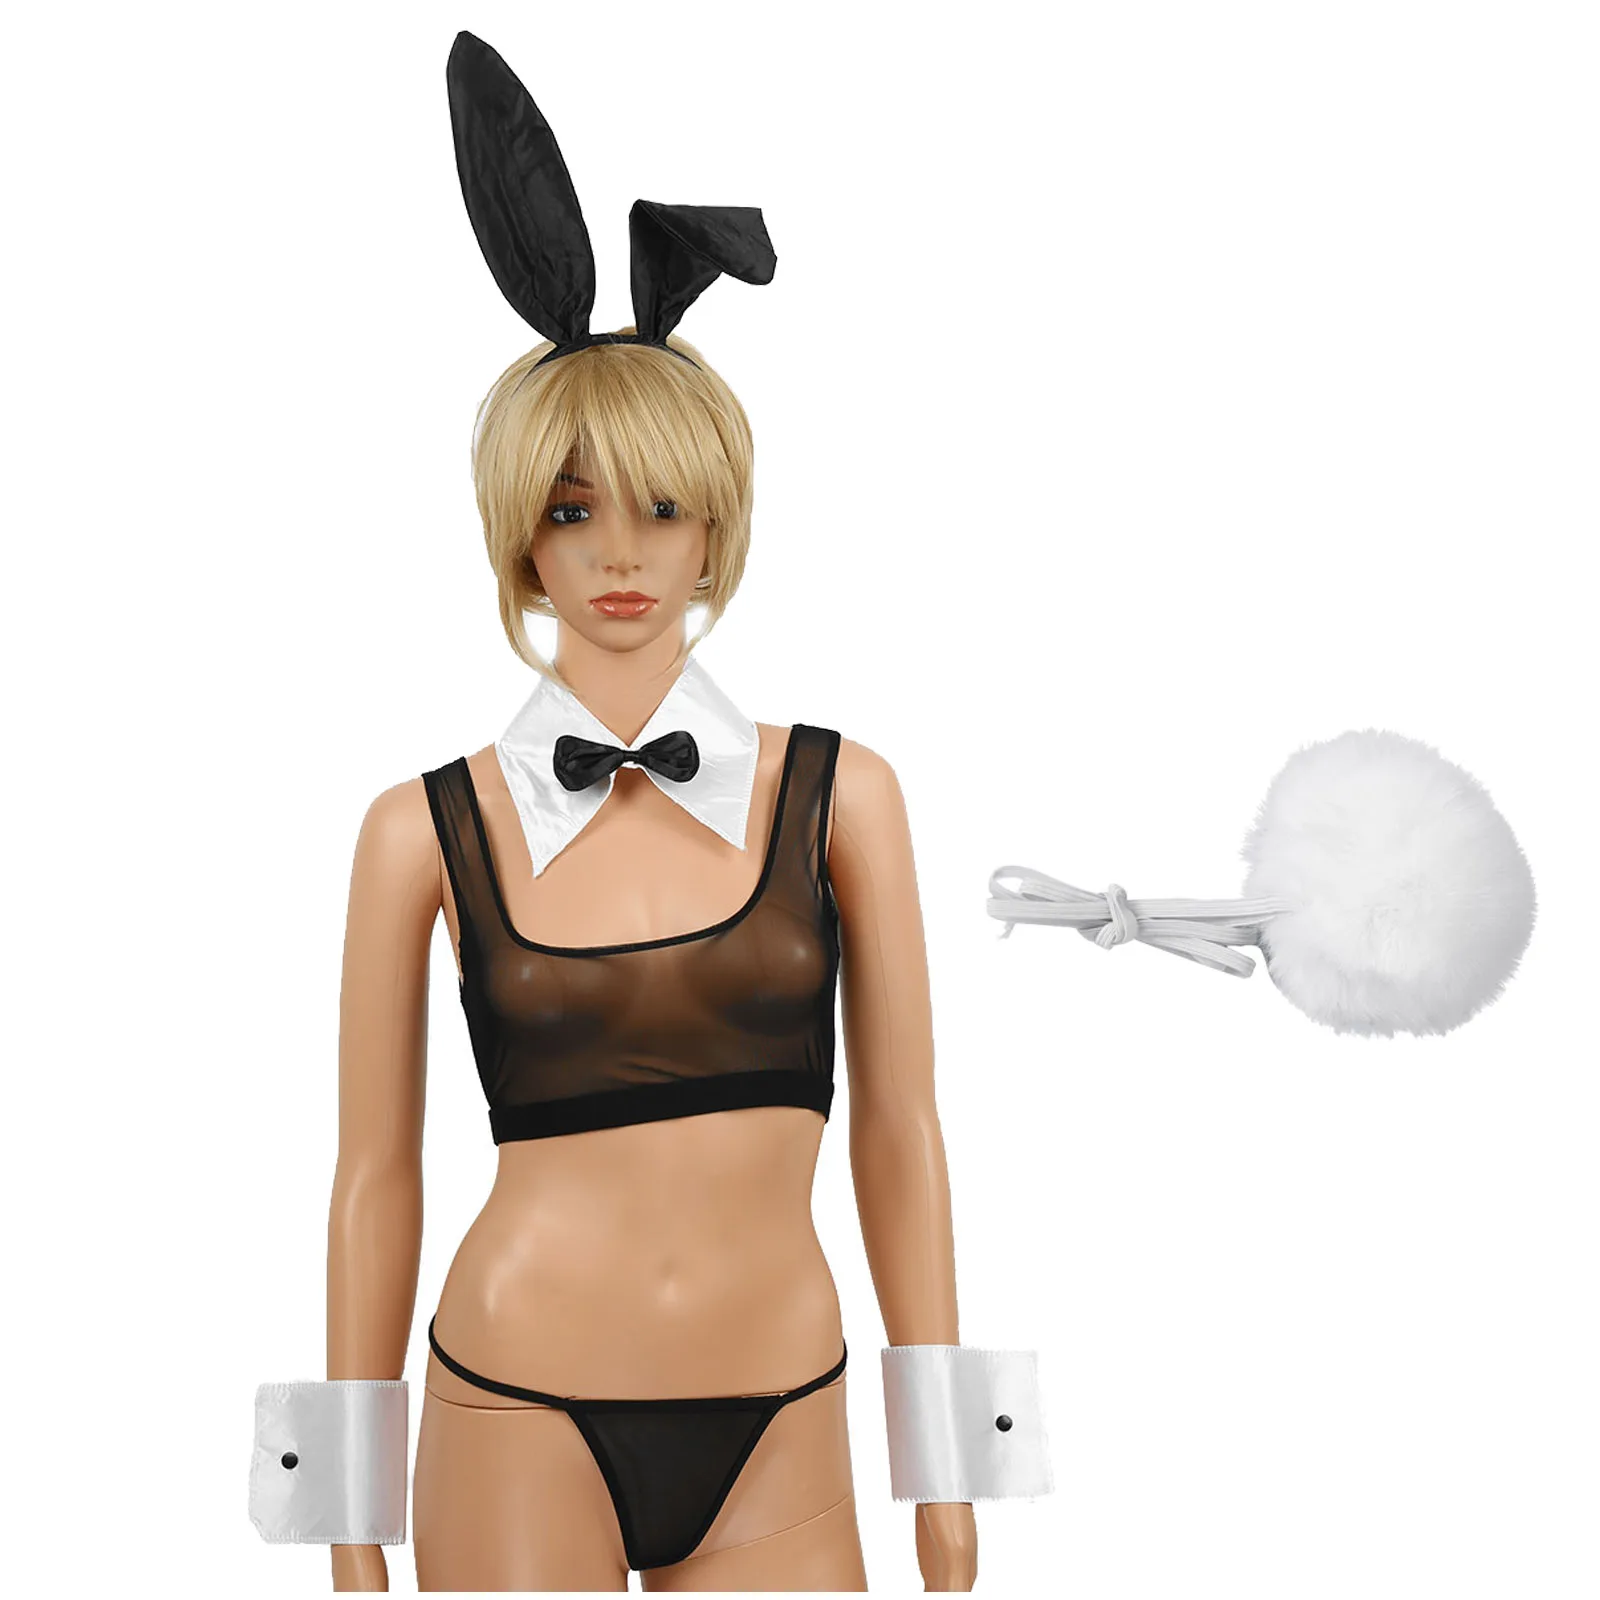 

Women Cute Naughty Bunny Girls Party Costumes Sexy Cosplay Halloween Rabbit Lingerie Set Erotic Bunny Headband with Bowtie Cuffs